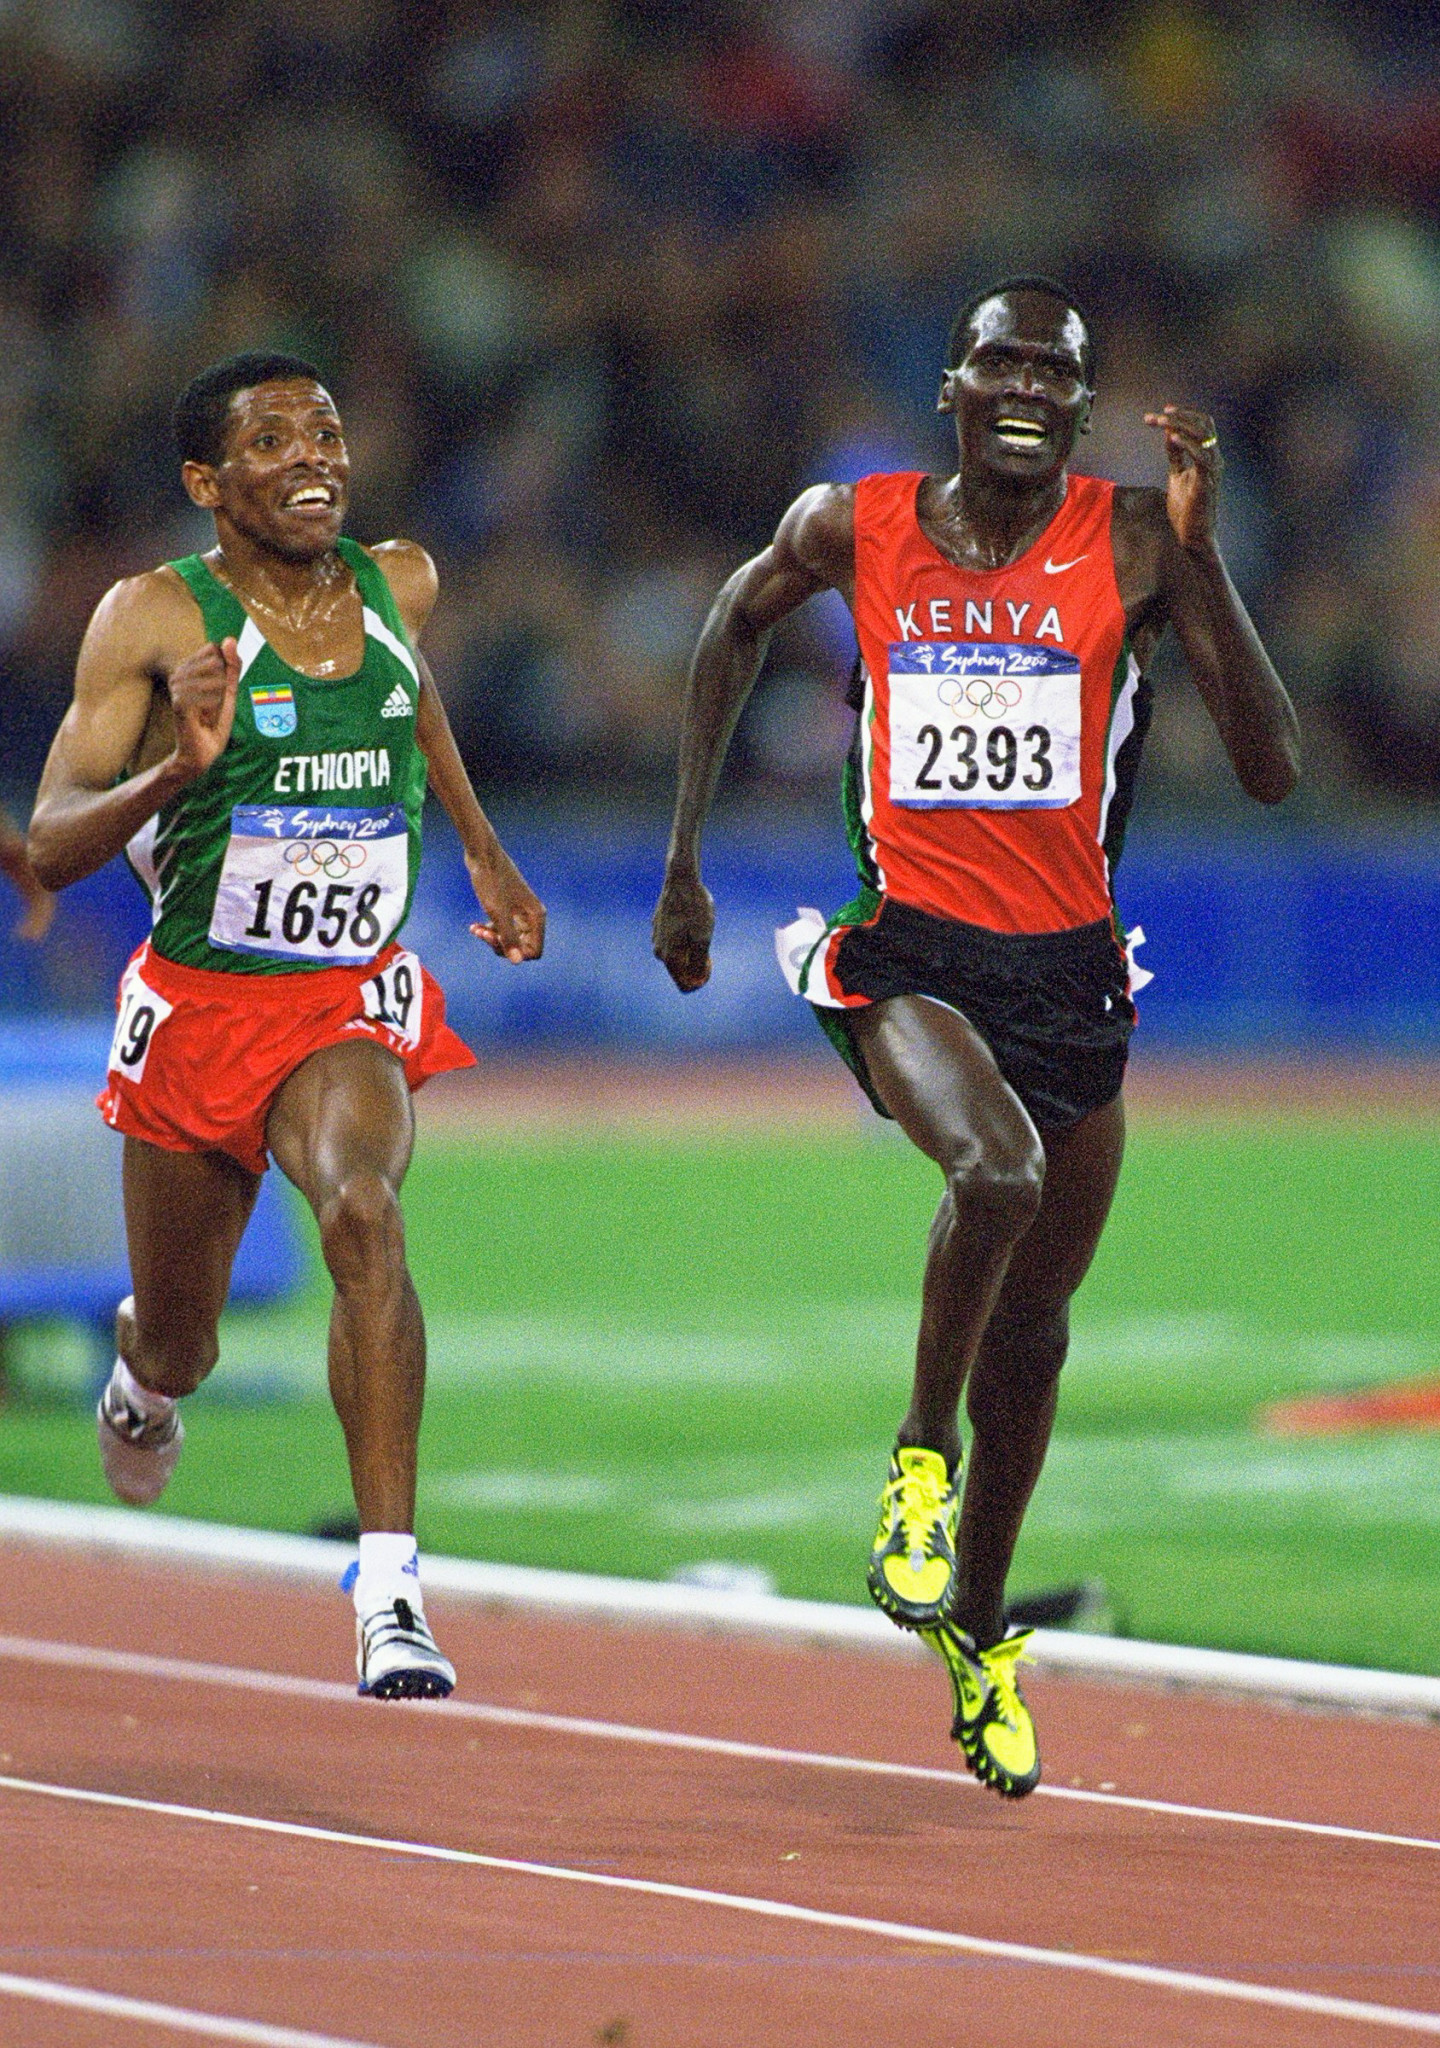 Paul Tergat, right, enjoyed a long rivalry with Ethiopia's Haile Gebrselassie, left, which culminated in an epic 10,000m at the 2000 Olympics in Sydney ©Getty Images 